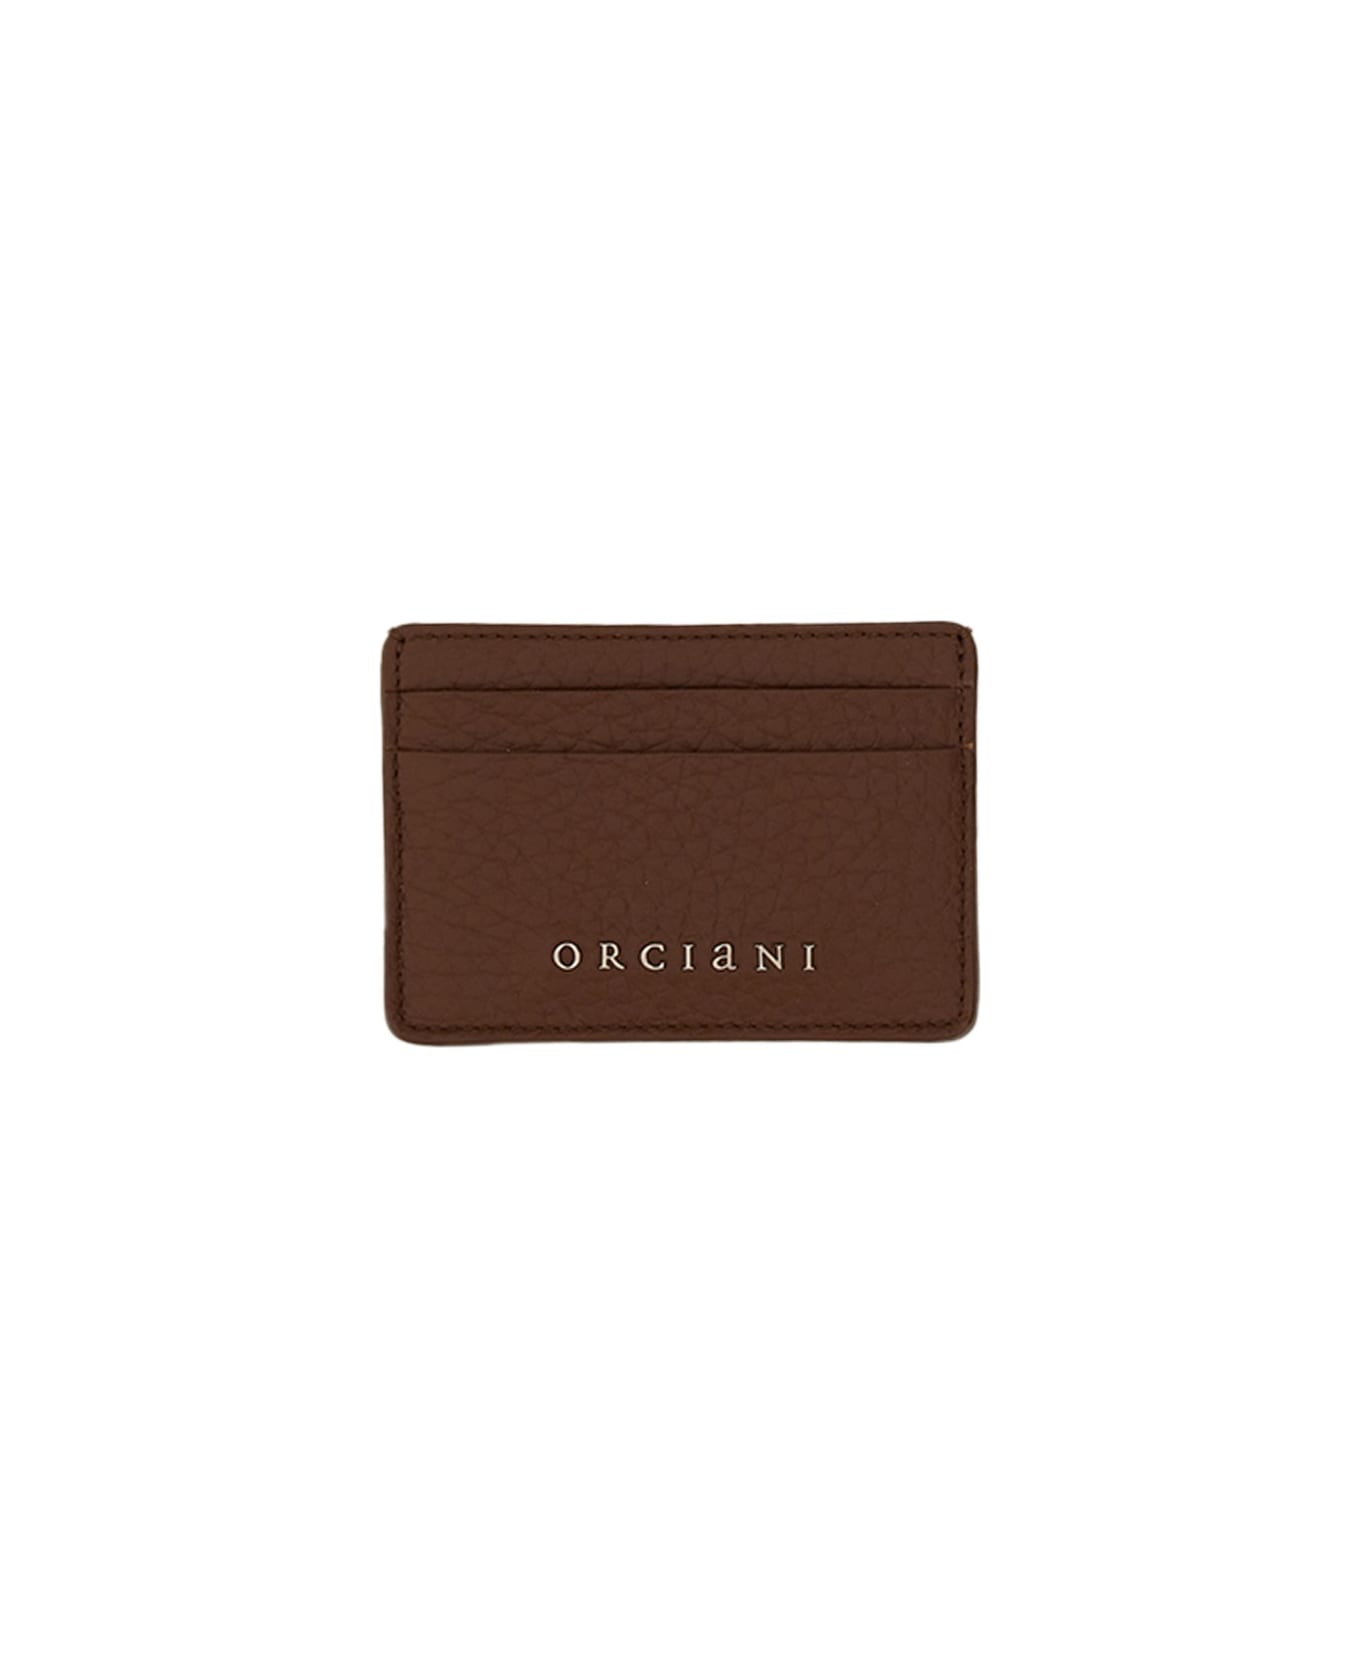 Orciani Soft Card Holder - BROWN